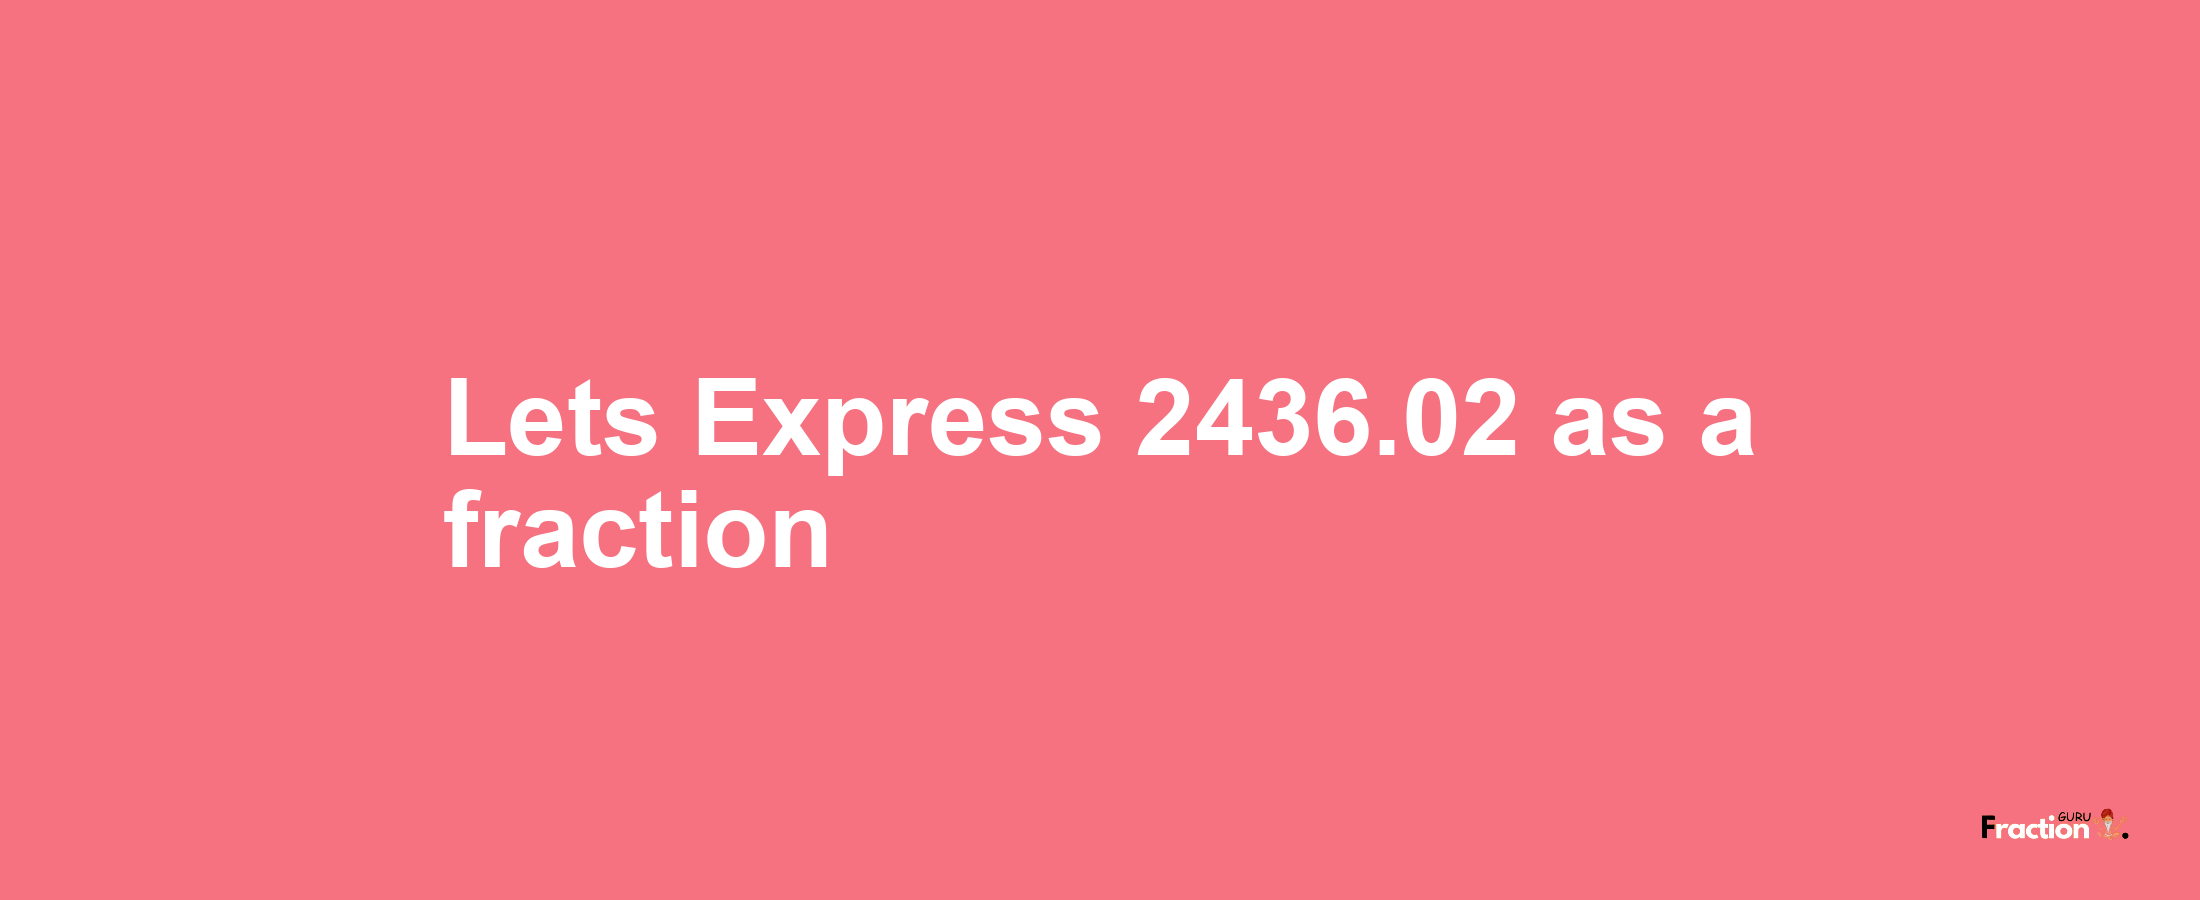 Lets Express 2436.02 as afraction